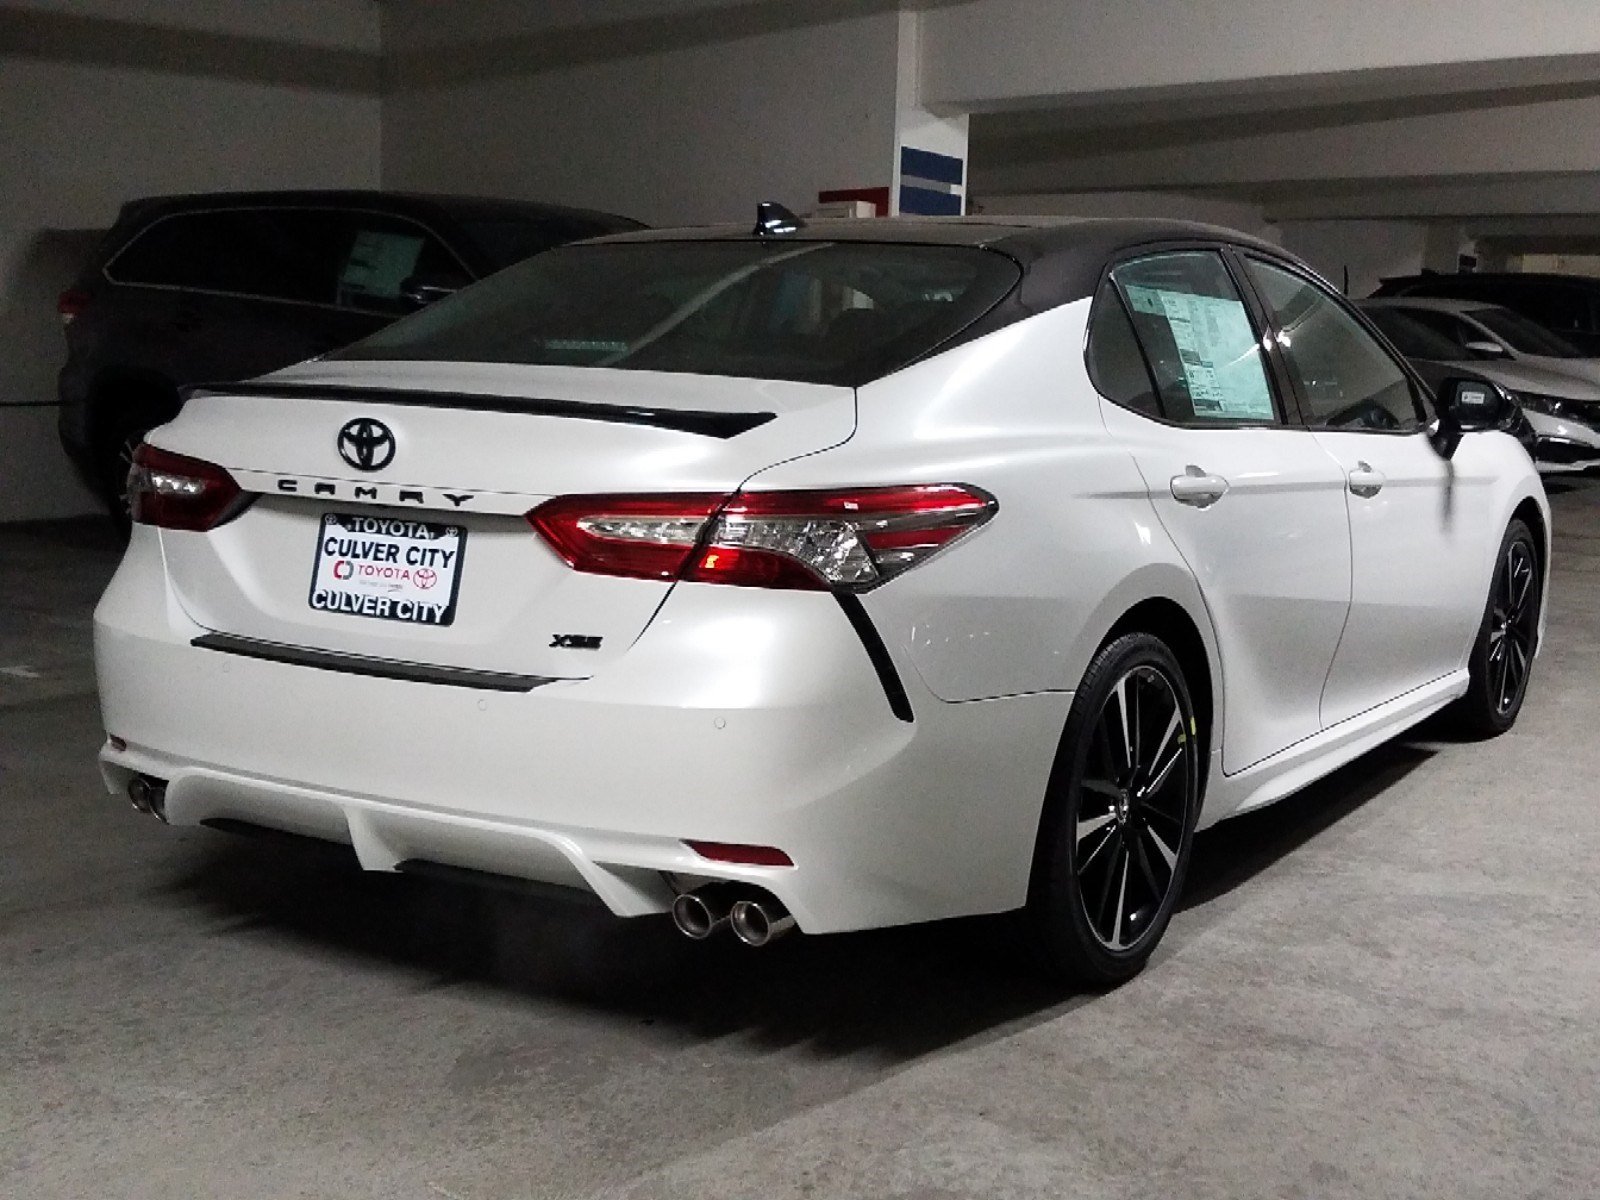 New 2019 Toyota Camry XSE V6 4dr Car in Culver City #21987 | Culver